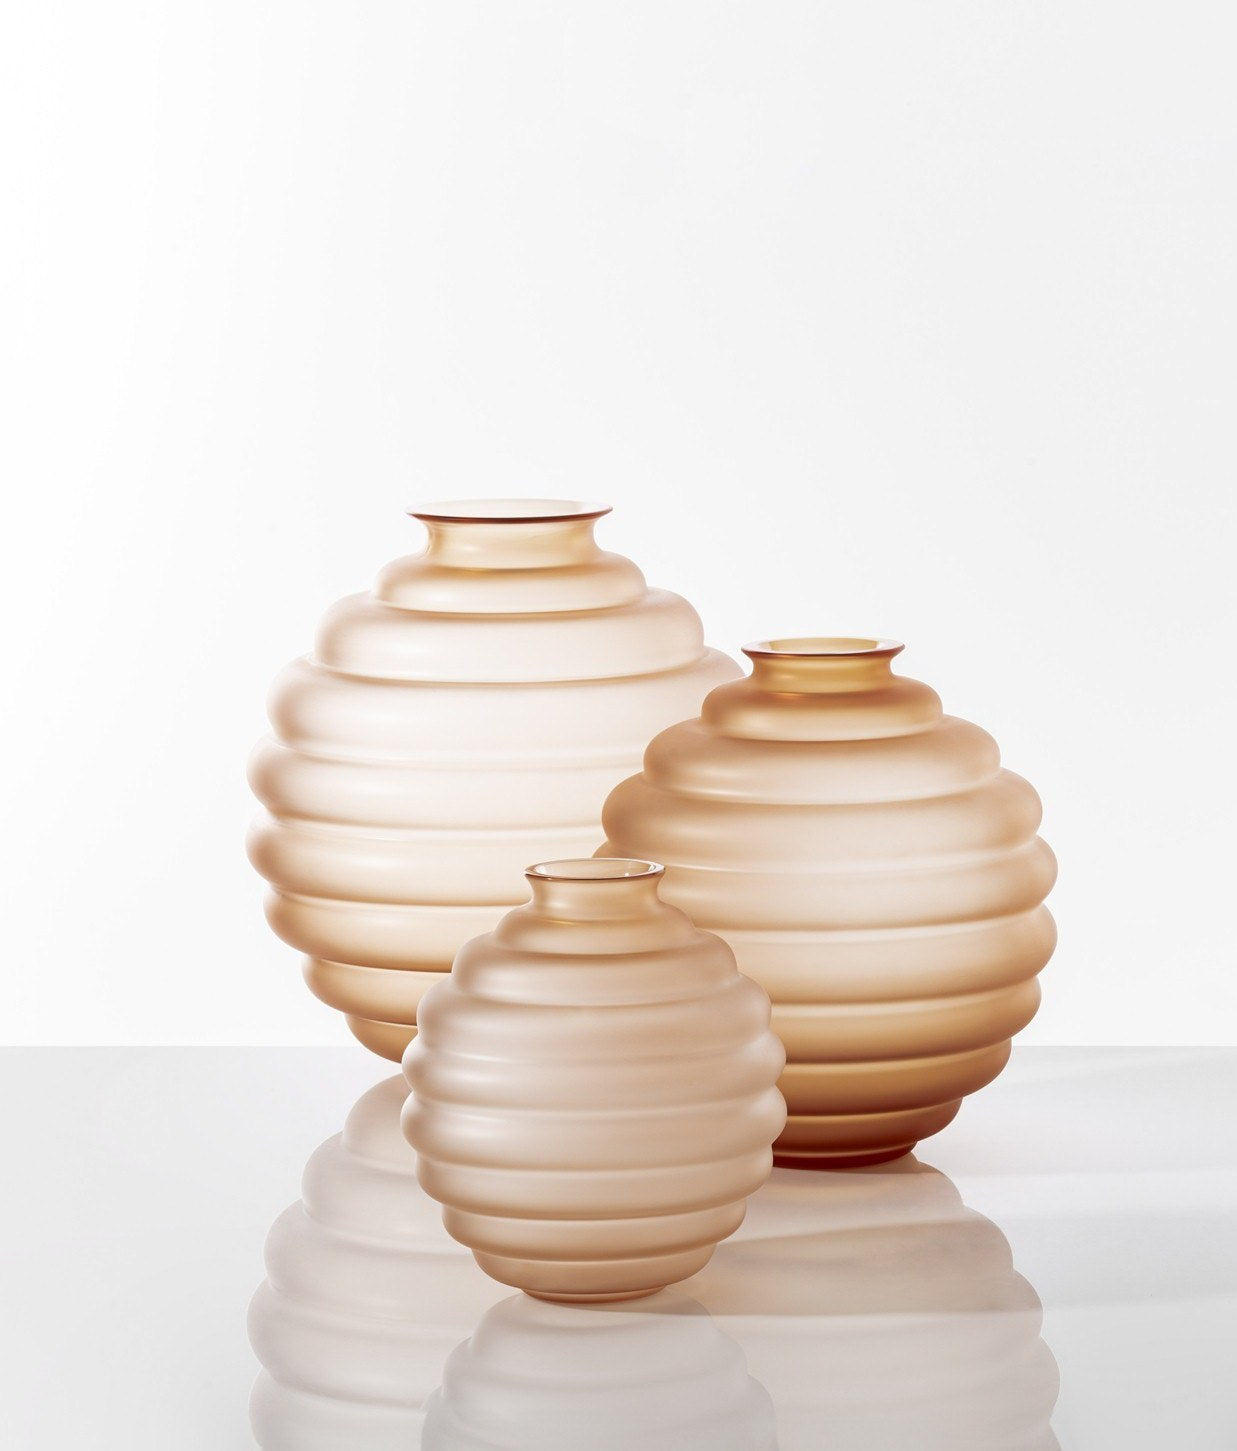 Deco Vase by Venini | Rhythm defines the shape with repeated rings that increase, decrease, and move like ripples in water. Available in matte or glossy, opale or transparent finishes | Designer: Napoleone Martinuzzi | Home Decor Vases | 2Jour Concierge, your luxury lifestyle shop